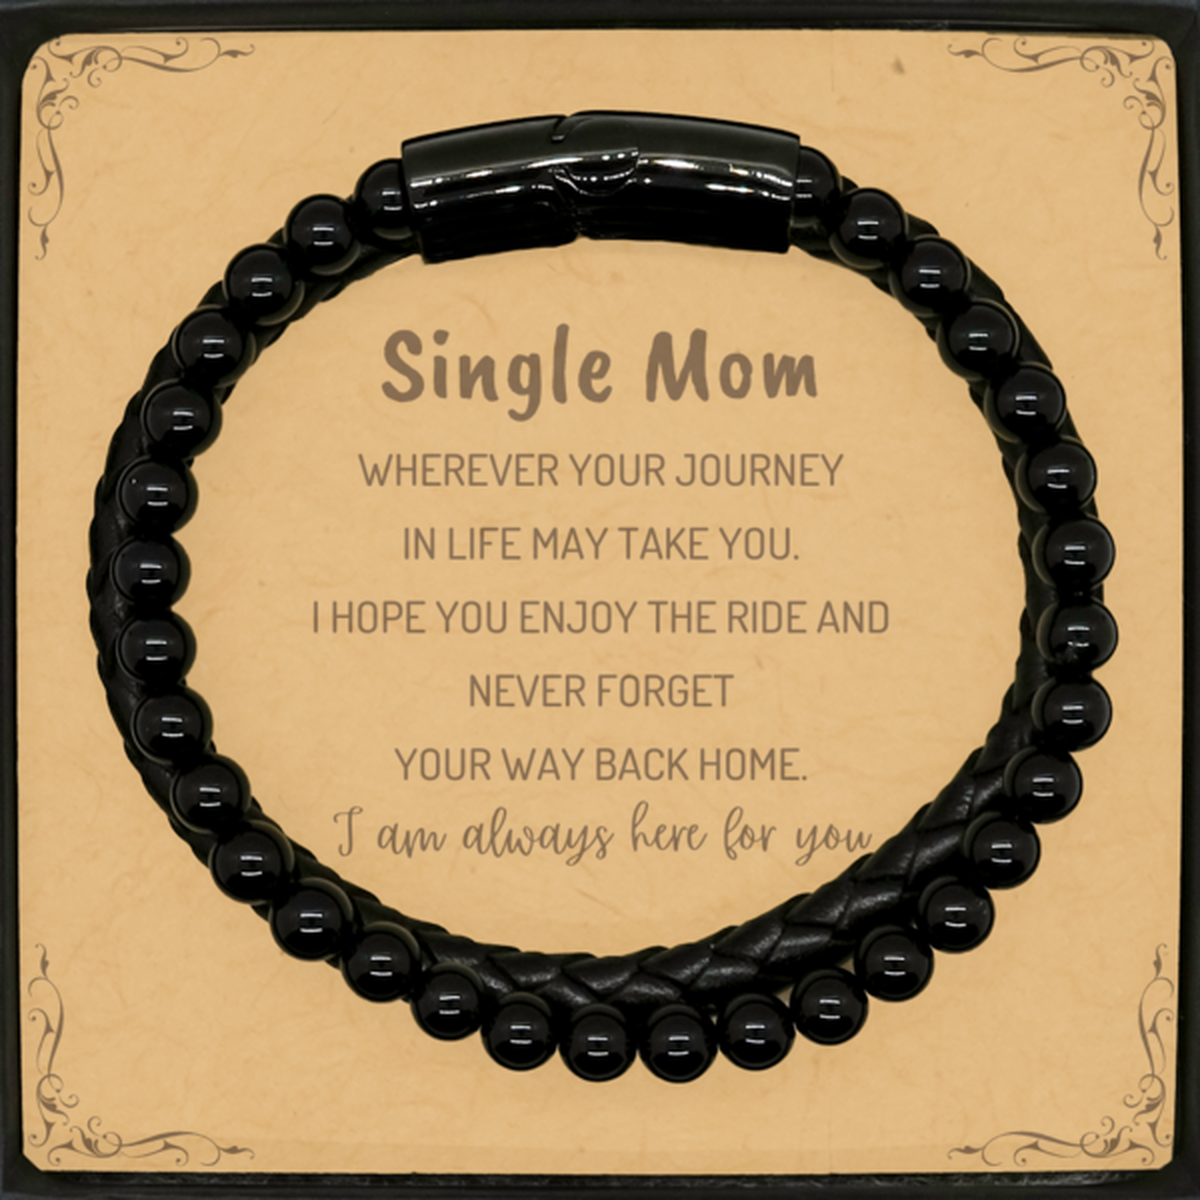 Single Mom wherever your journey in life may take you, I am always here for you Single Mom Stone Leather Bracelets, Awesome Christmas Gifts For Single Mom Message Card, Single Mom Birthday Gifts for Men Women Family Loved One